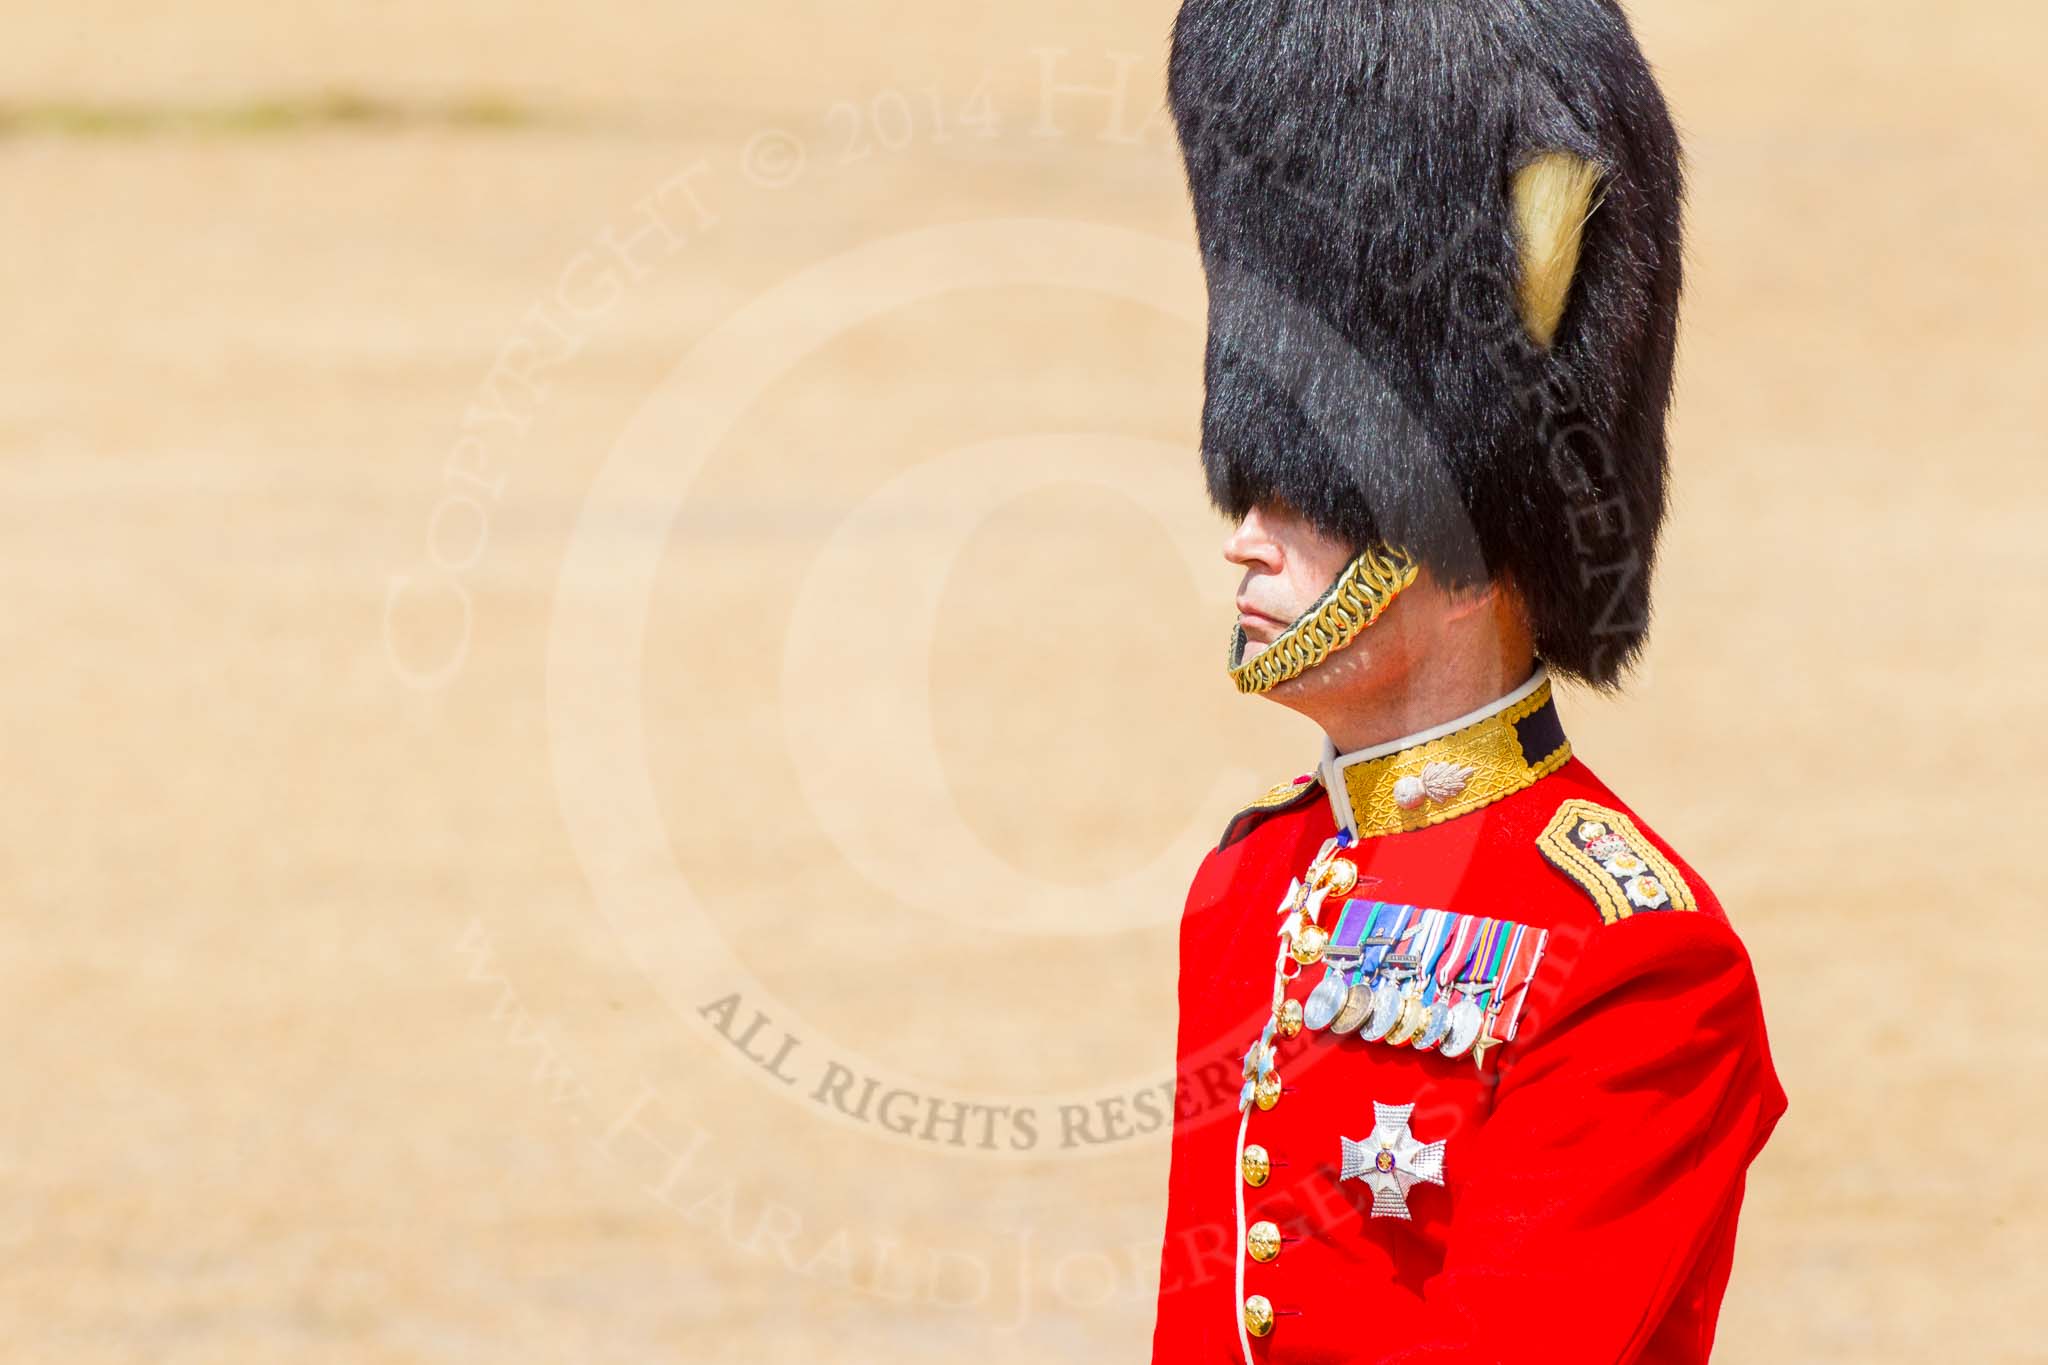 The Colonel's Review 2014.
Horse Guards Parade, Westminster,
London,

United Kingdom,
on 07 June 2014 at 12:08, image #715